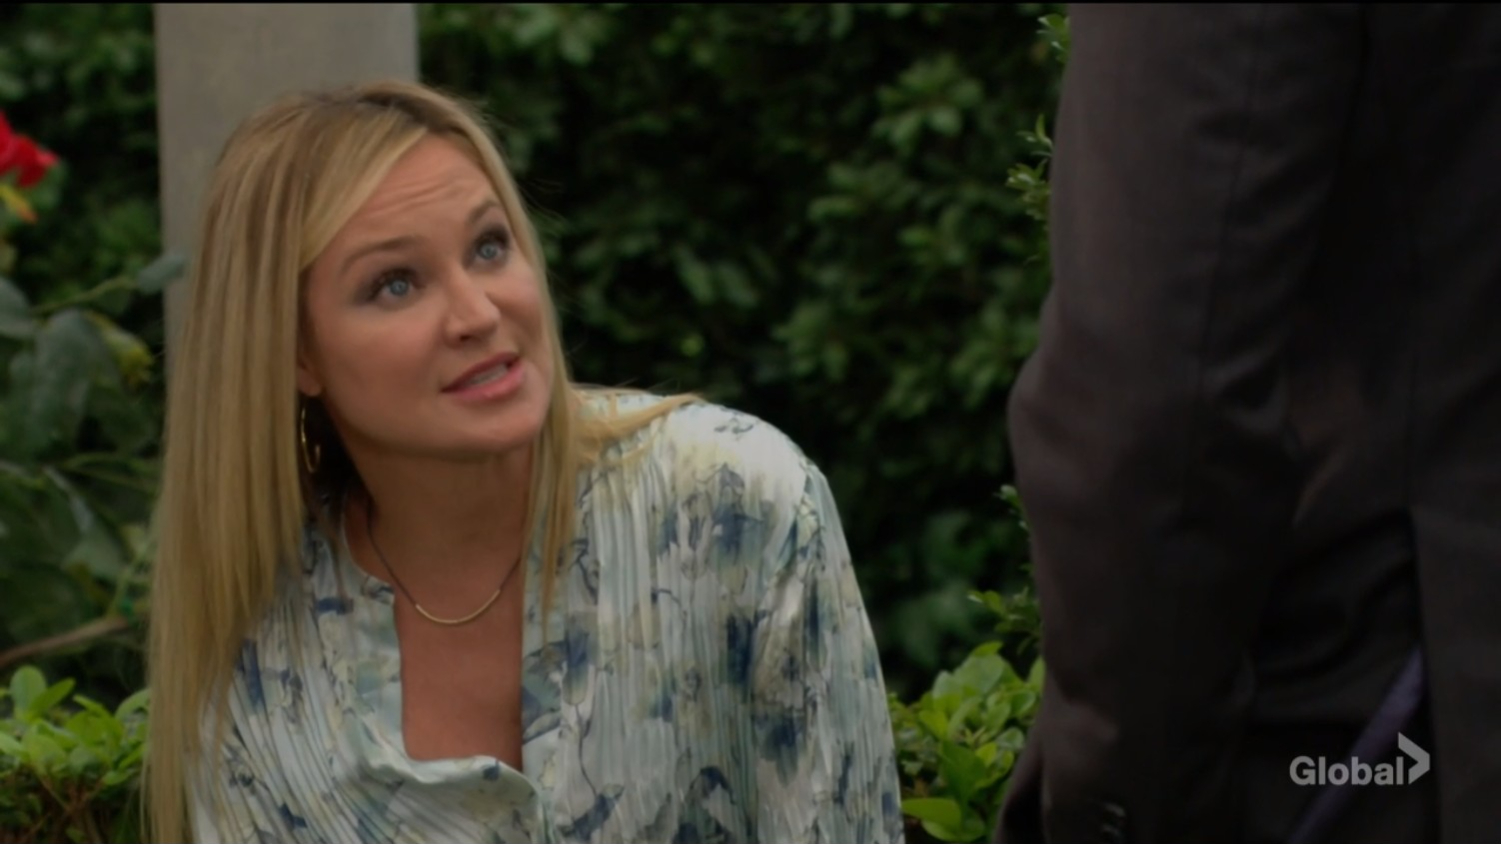 sharon tells adam to wait and see what's in store